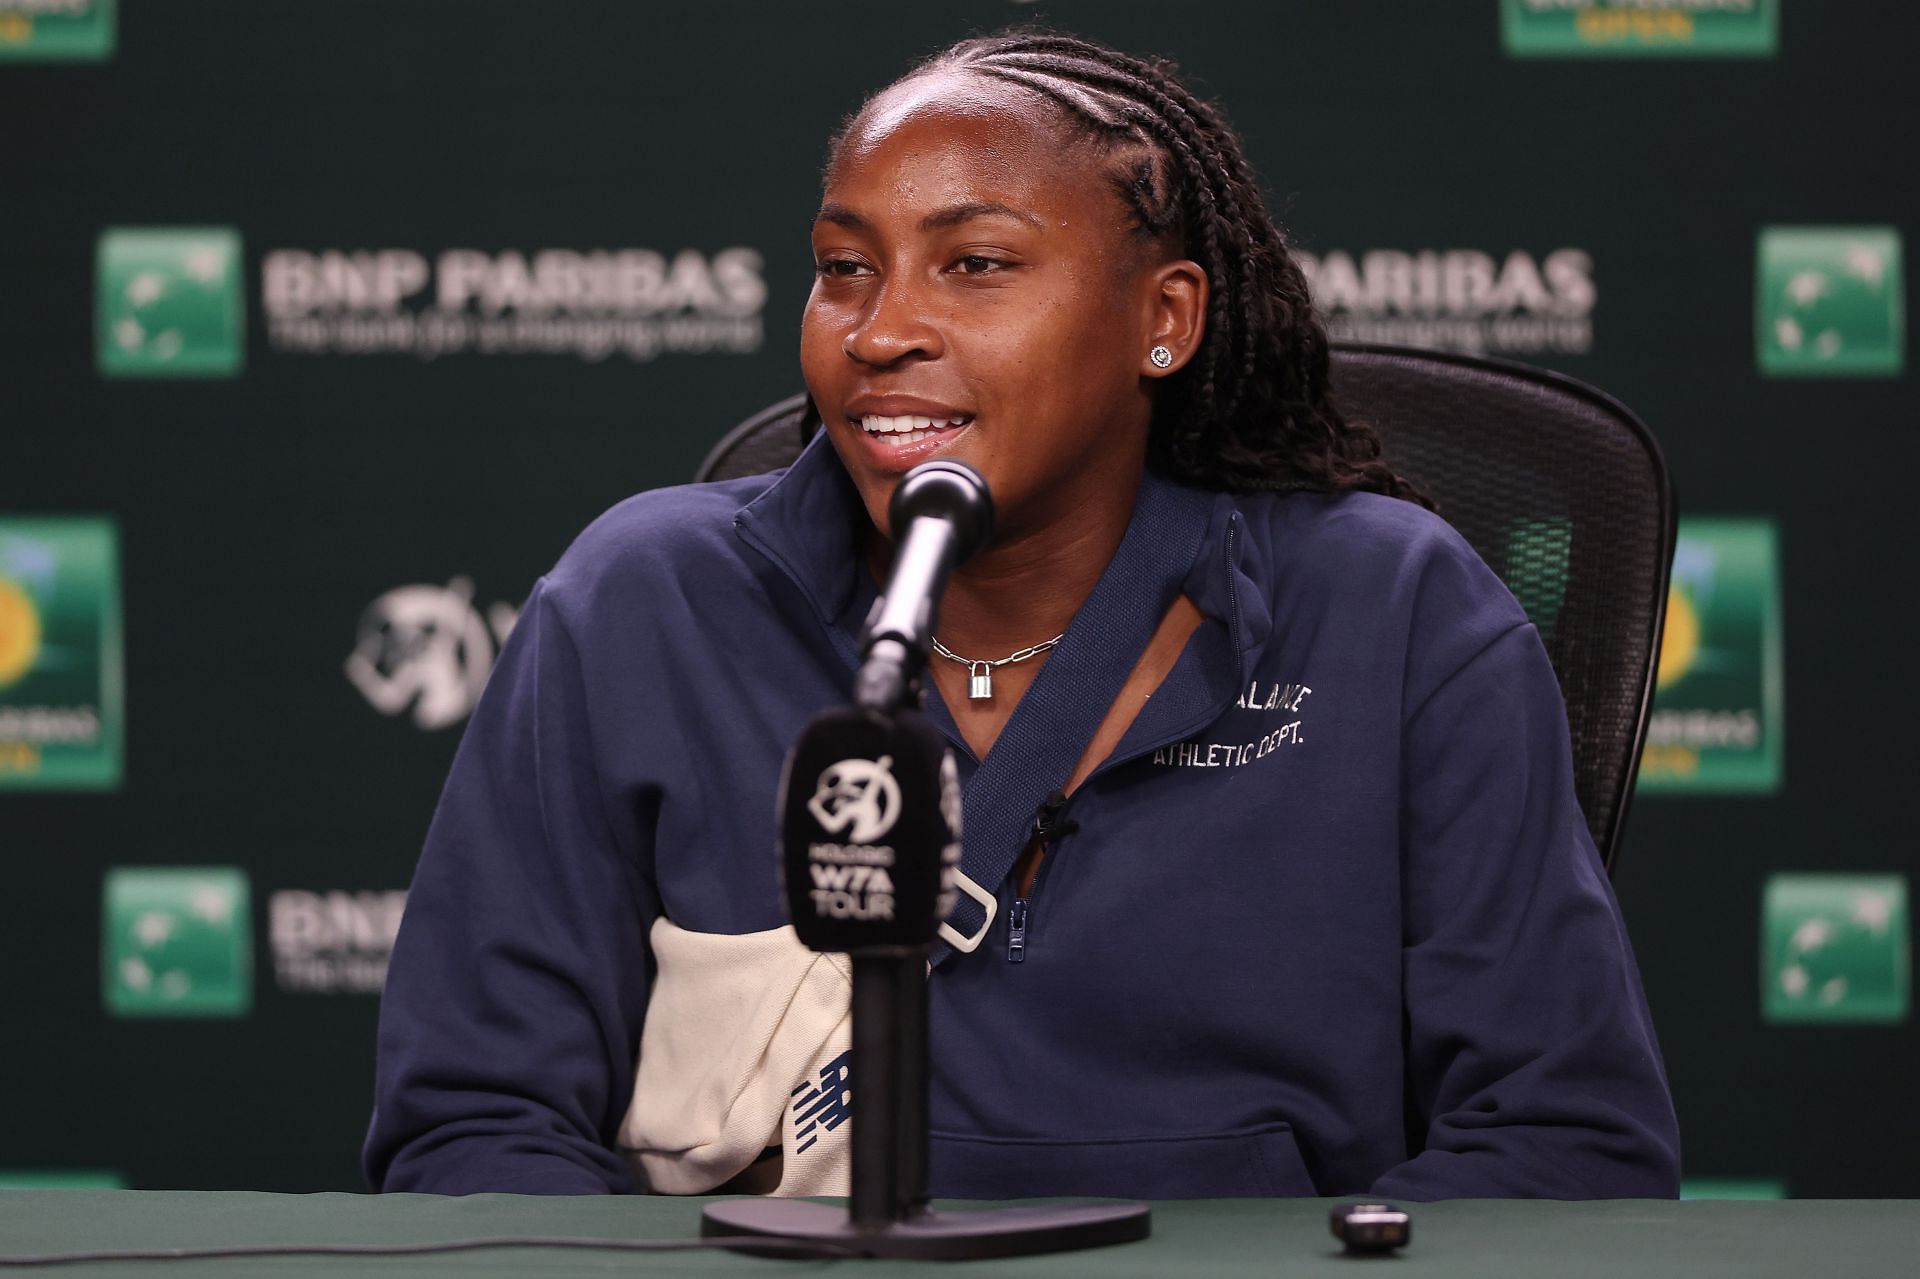 Coco Gauff addresses a press conference at the BNP Paribas Open